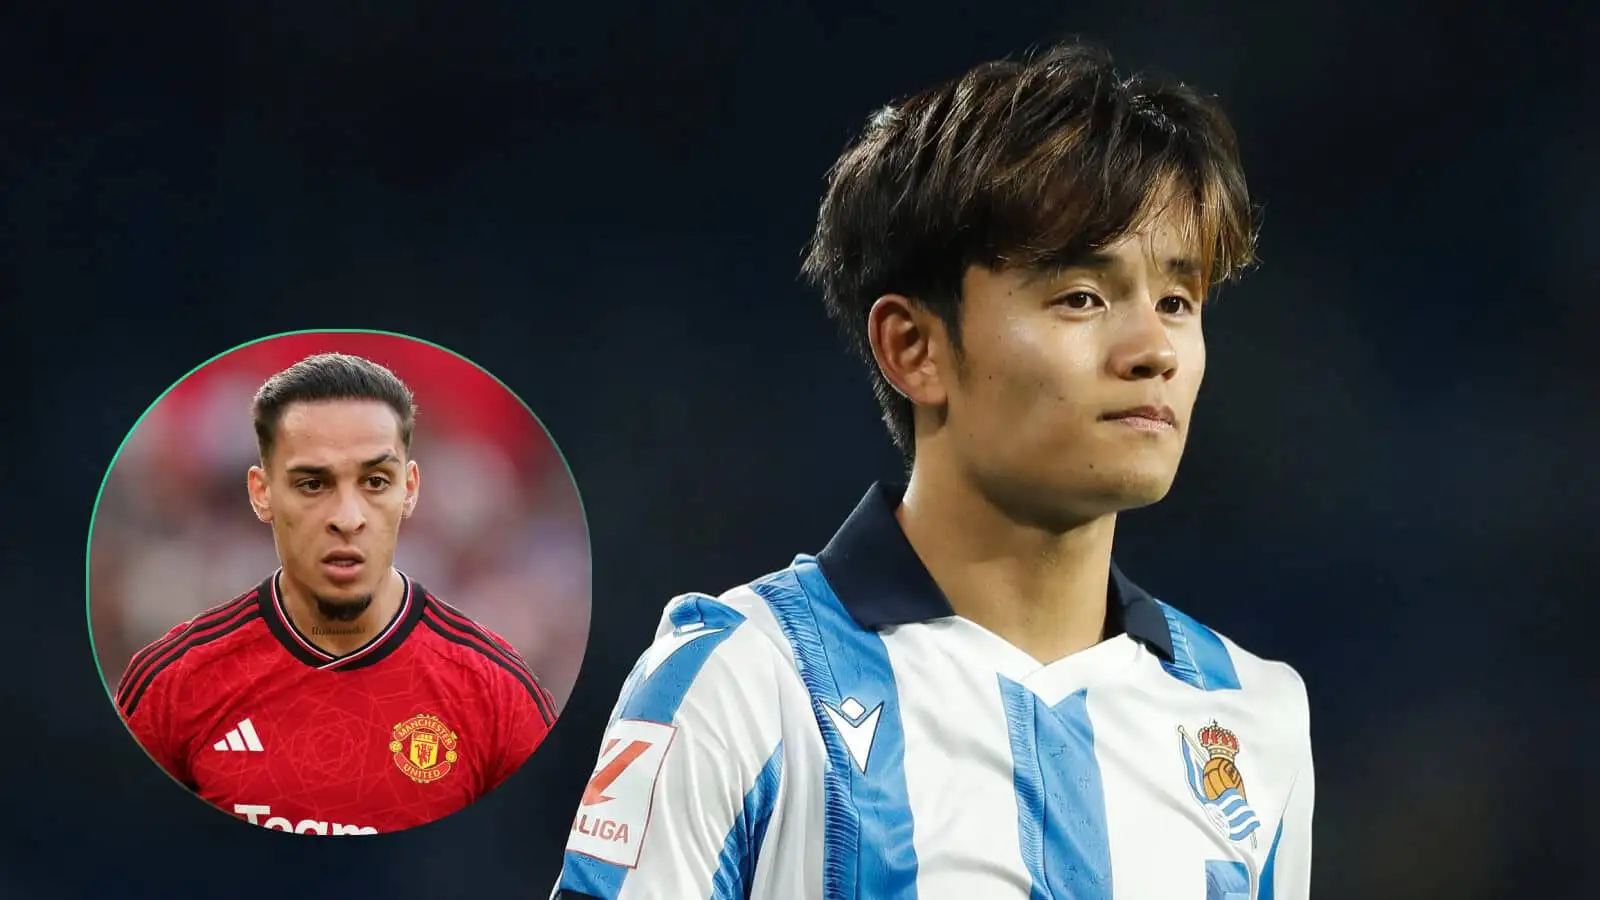 Man Utd ready approach to sign €50m-rated former Real Madrid winger as upgrade on failed Ten Hag signing